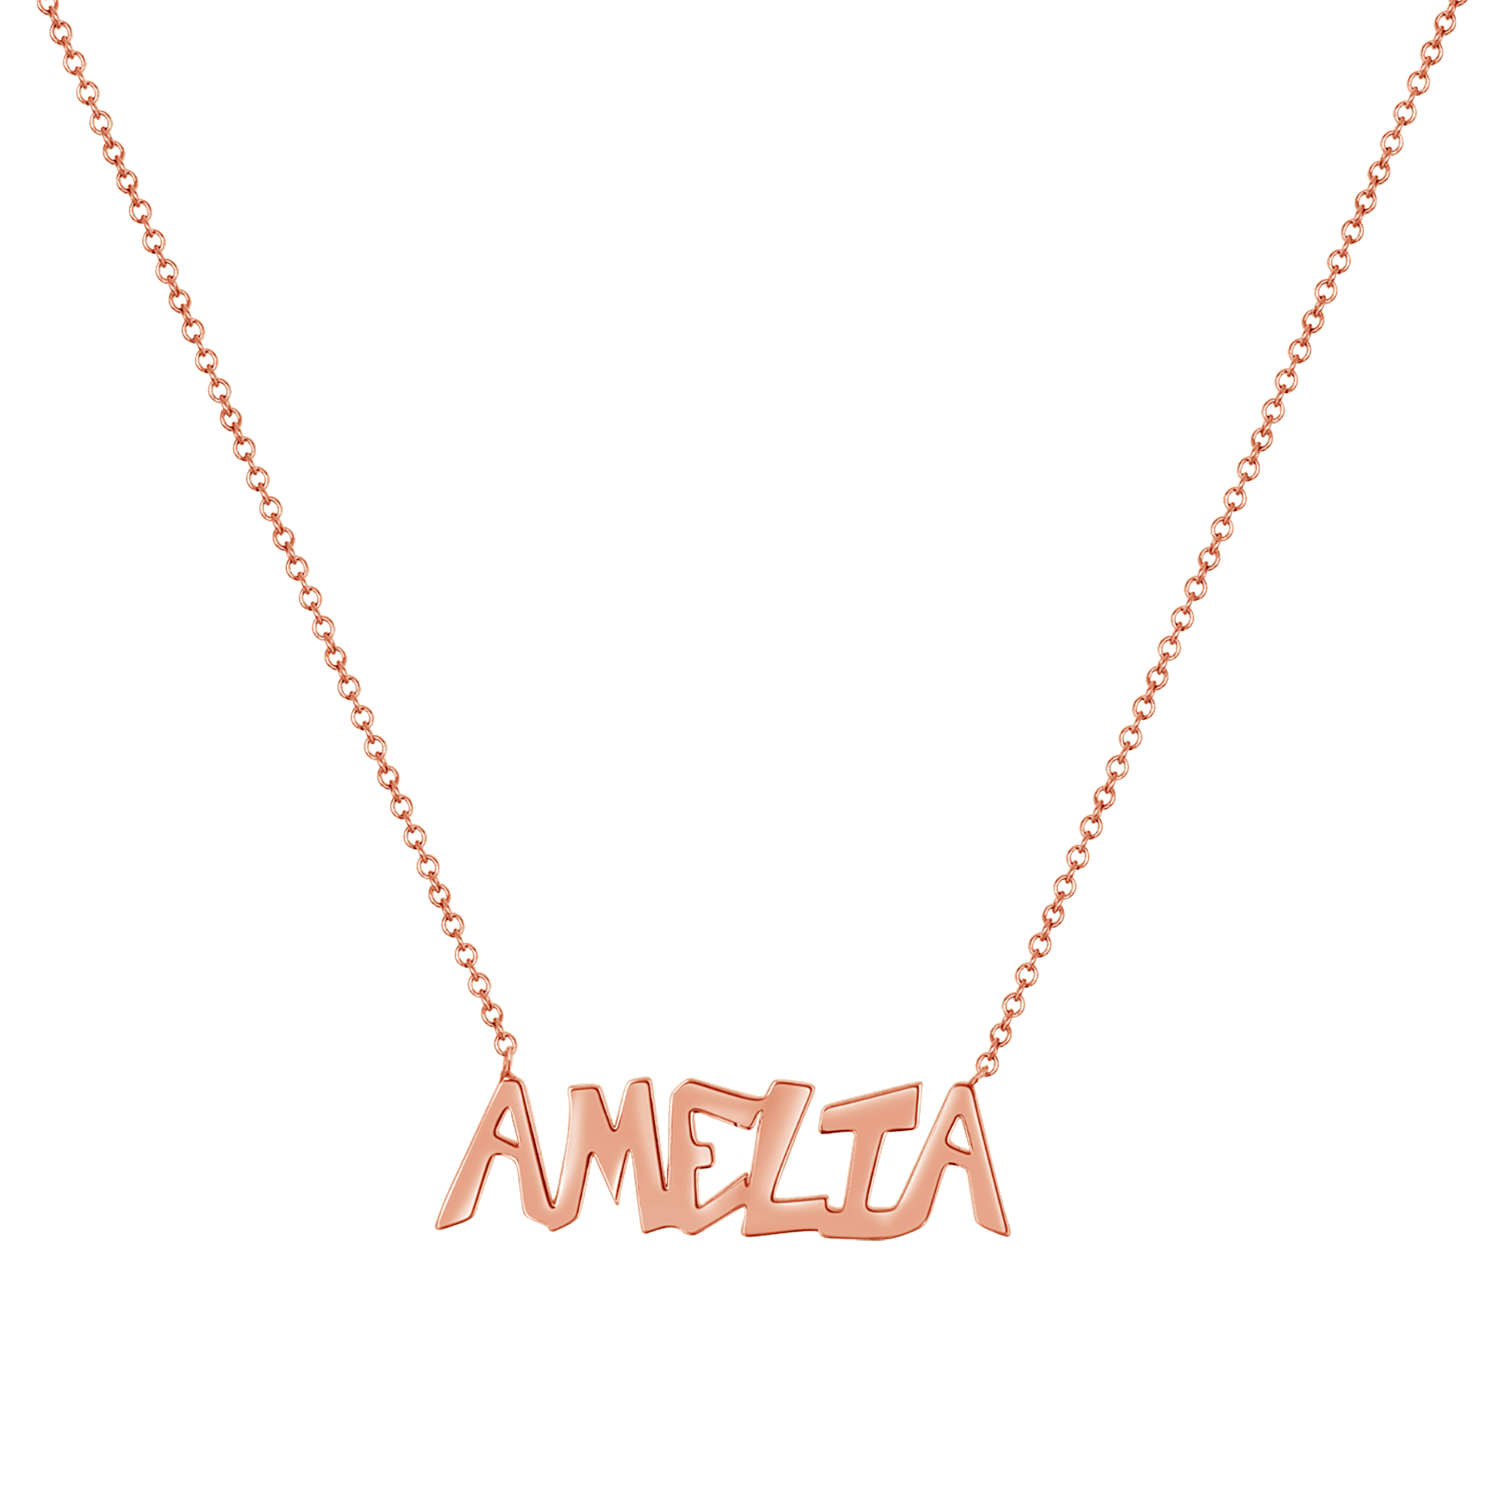 rose gold name pendant necklace, personalized necklace for women, graffti name necklace